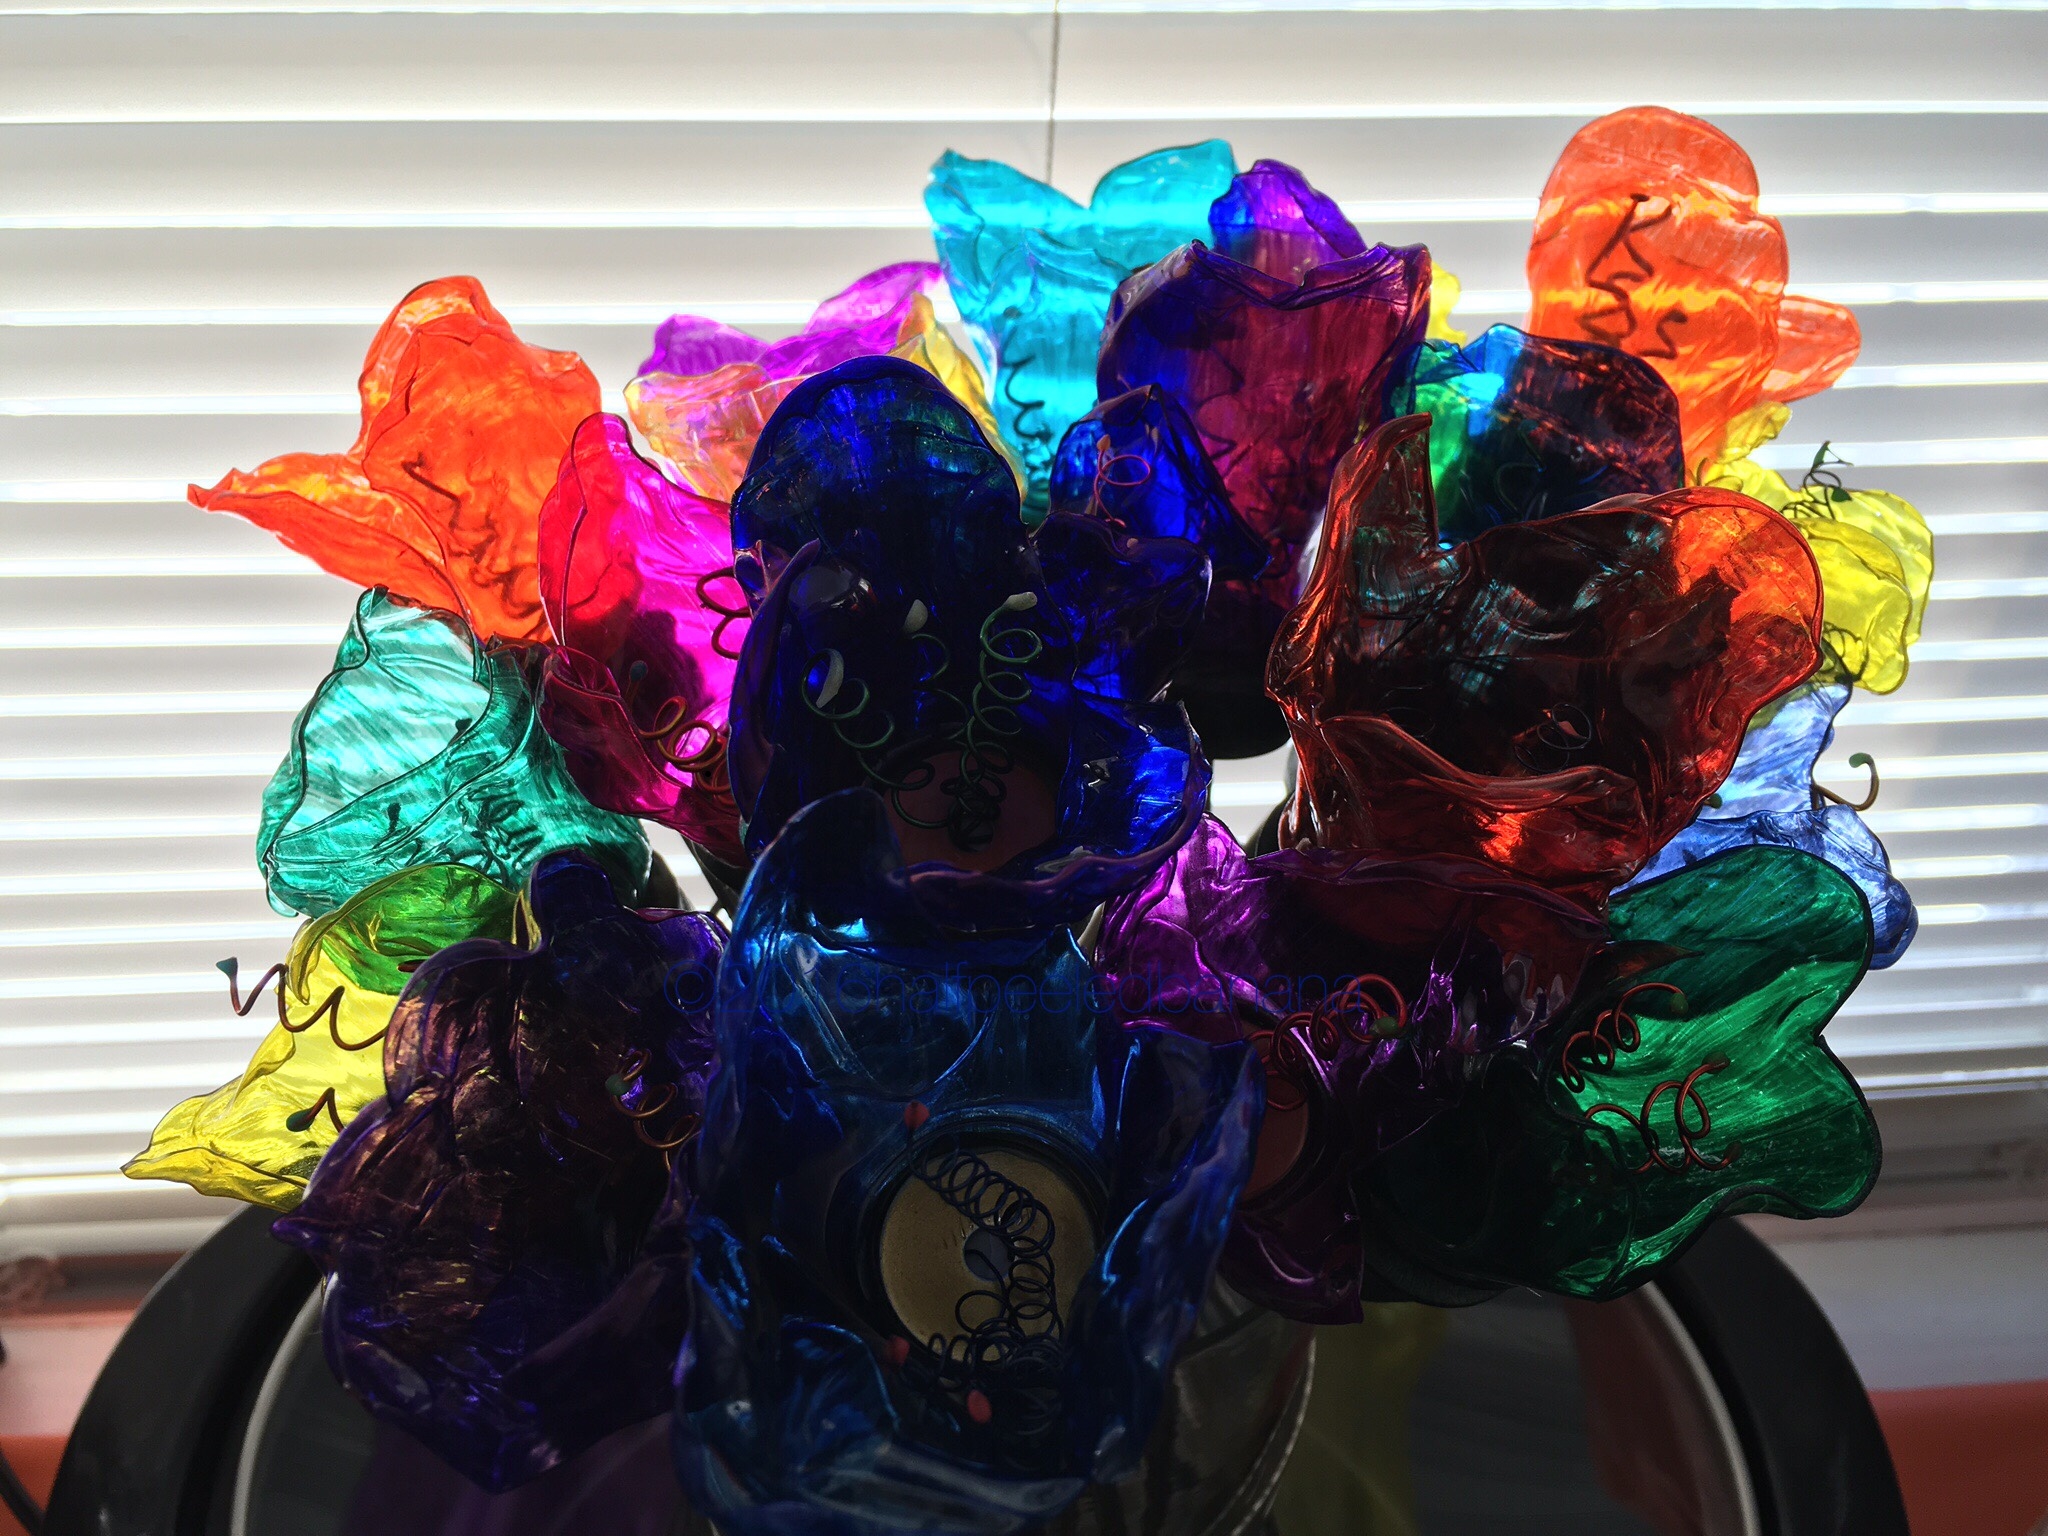 perfect in the light! this bouquet was artfully created from upcycled water bottles!